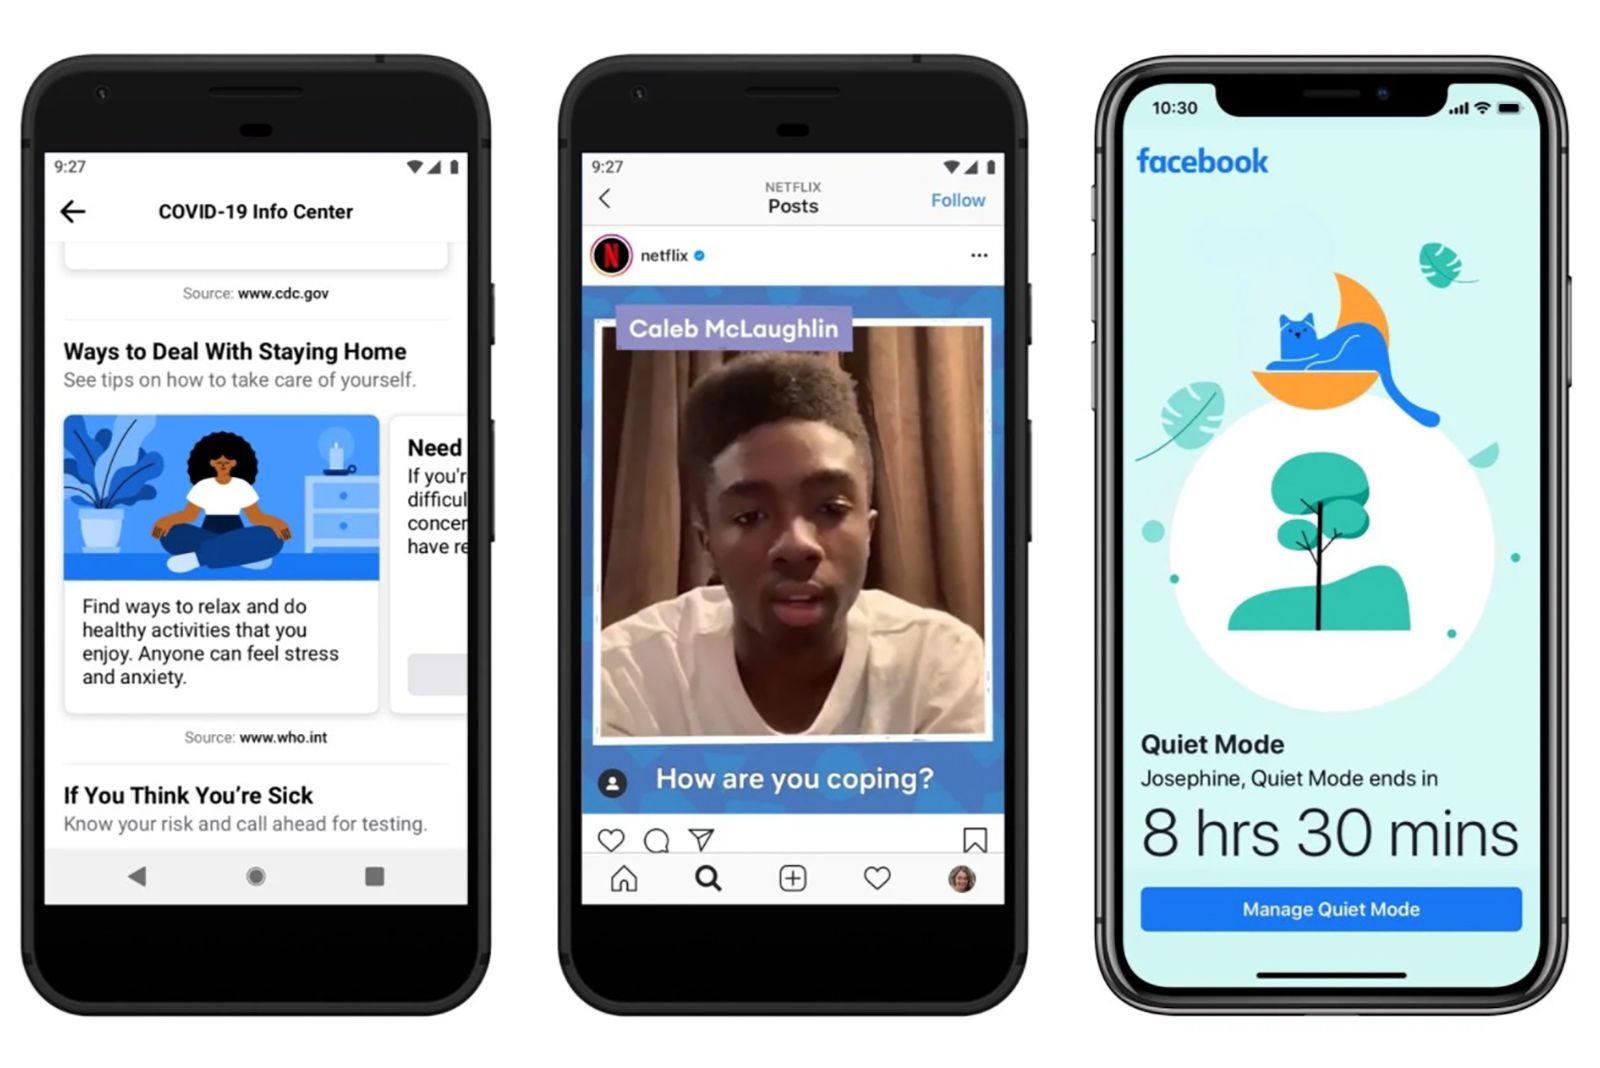 Facebook adds quiet mode to help you manage screen time image 1